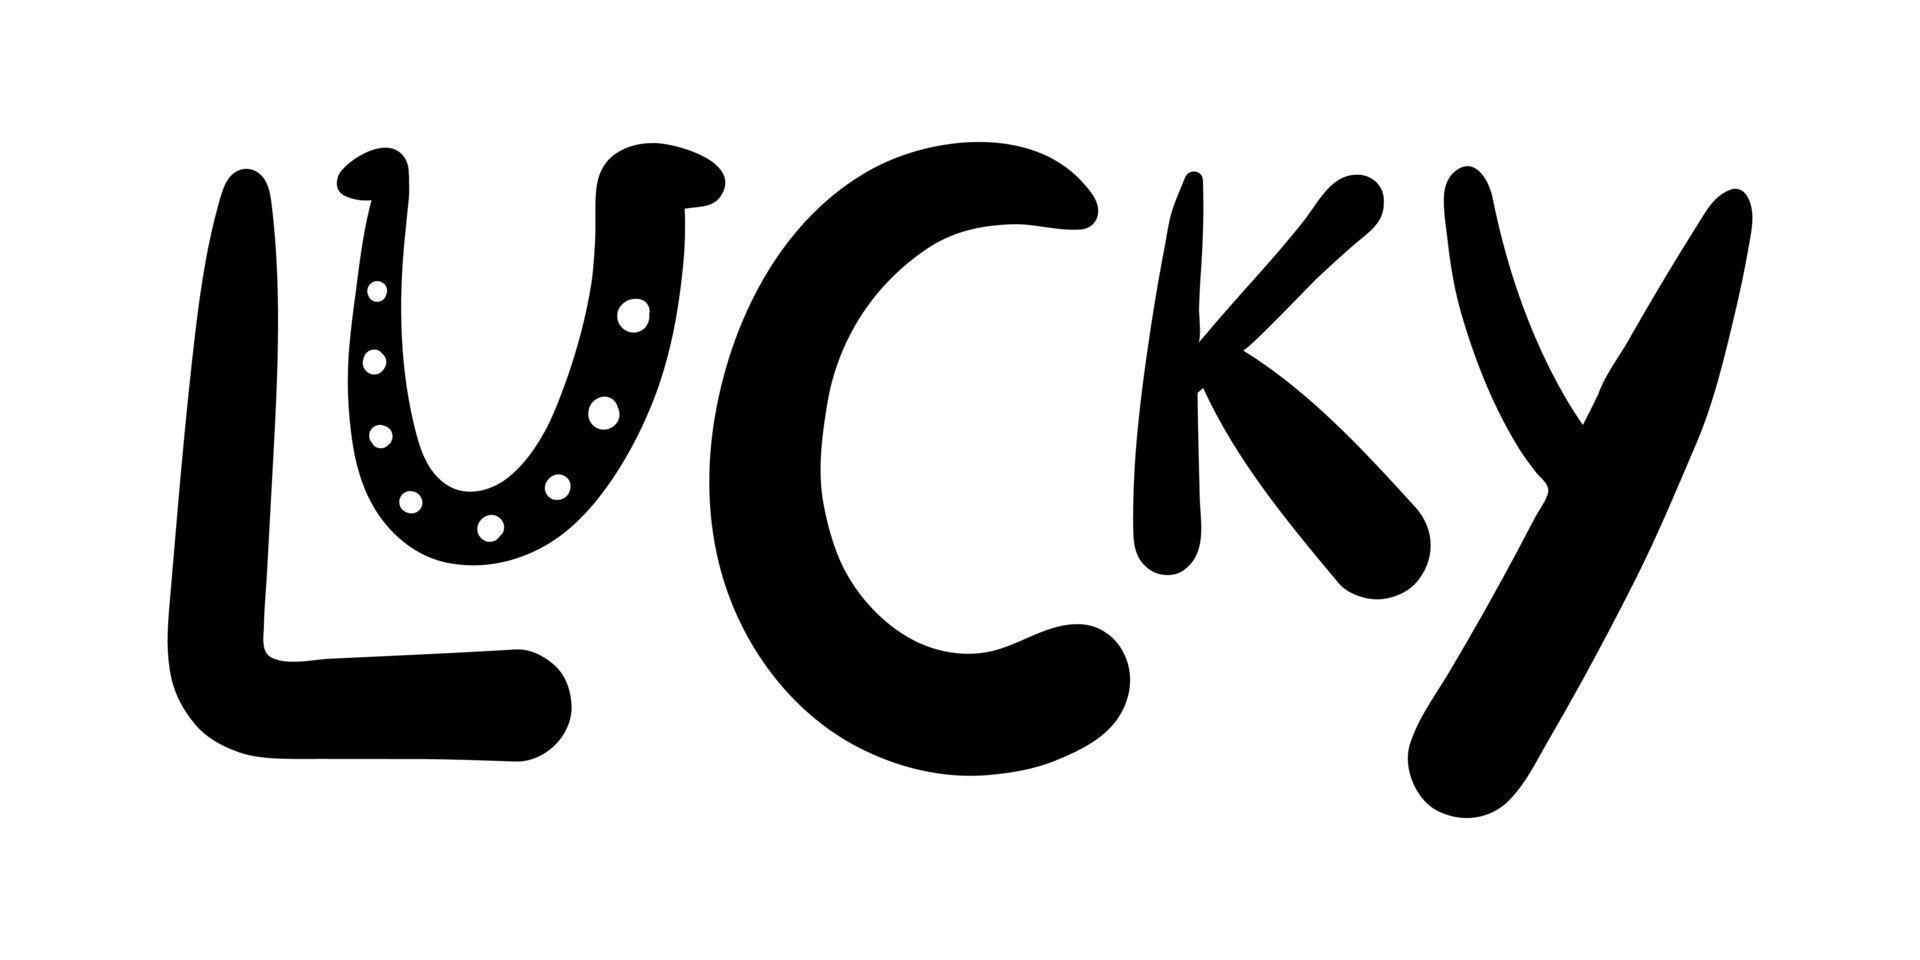 Lucky hand drawn lettering with horseshoe u vector illustration